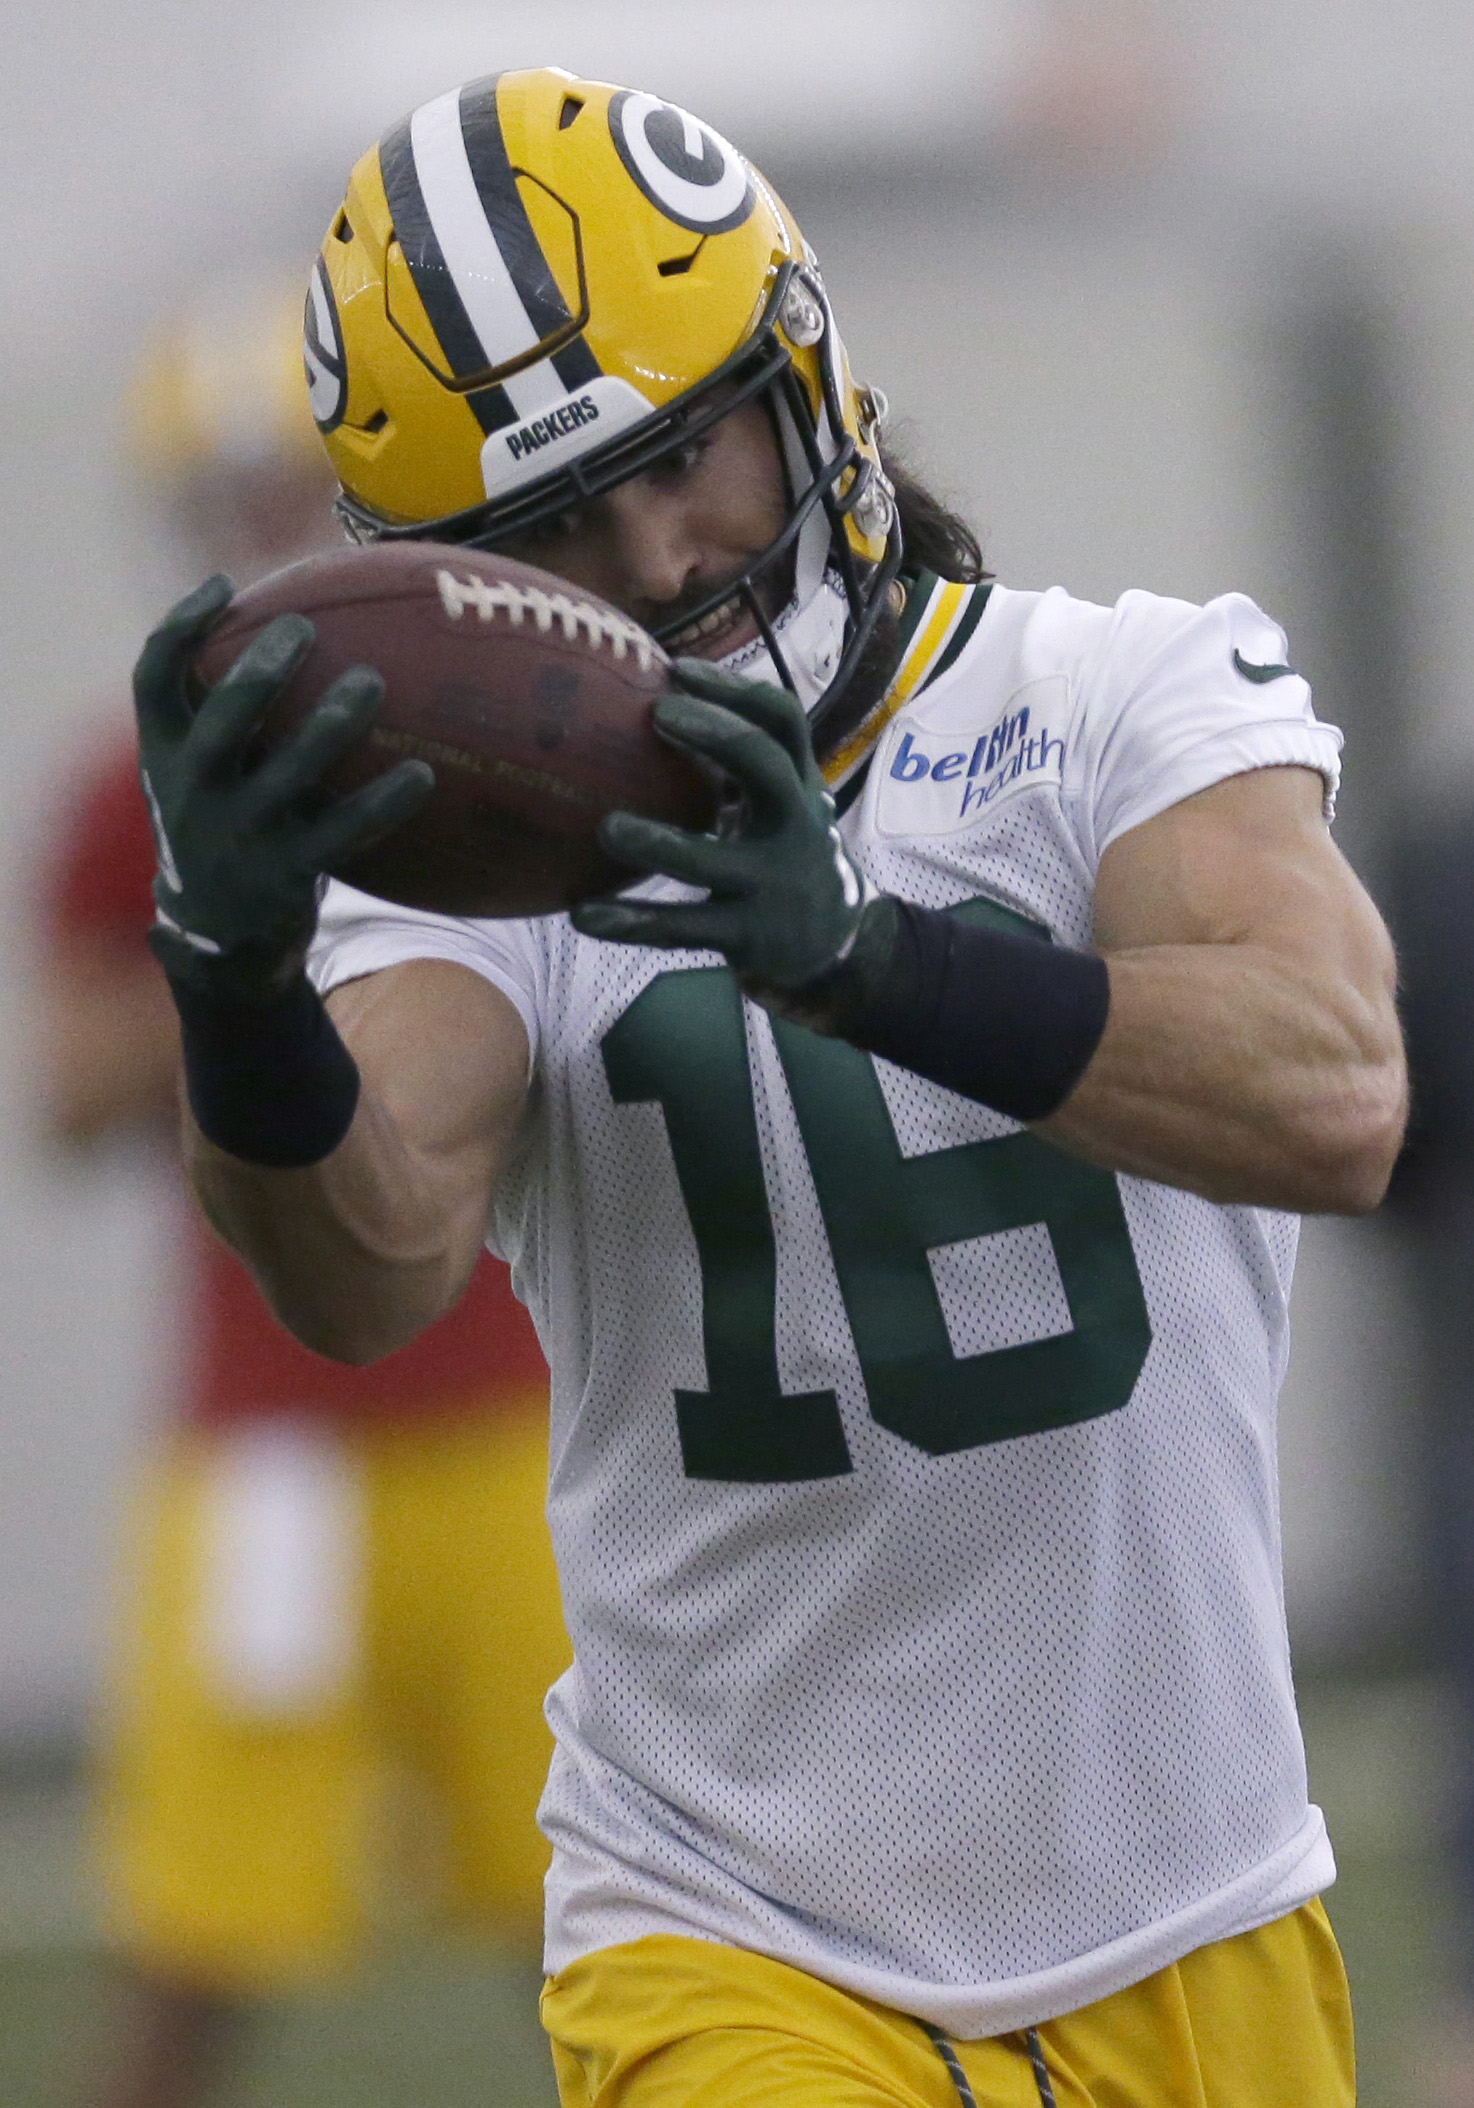 NFL: Green Bay Packers-Rookie Minicamp